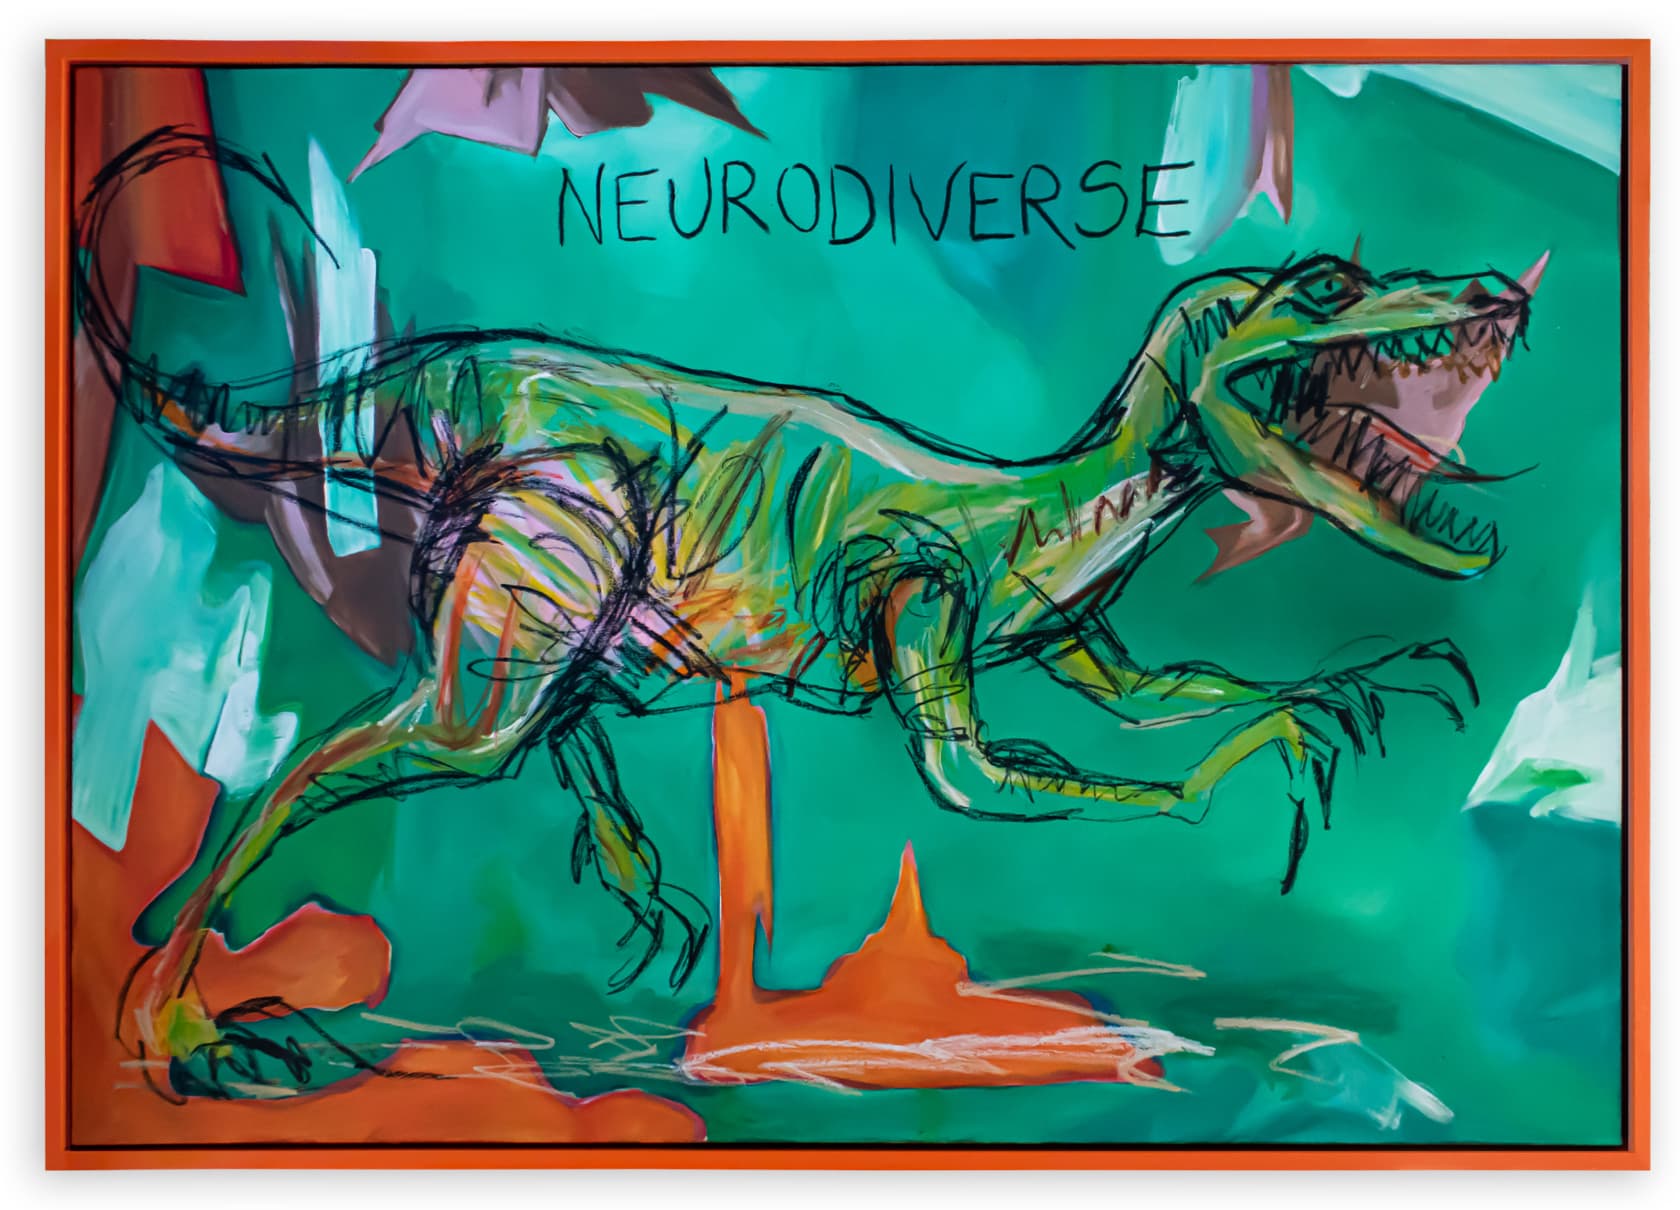 the connor brothers Neurodiverse Acrylic and oil stick on canvas